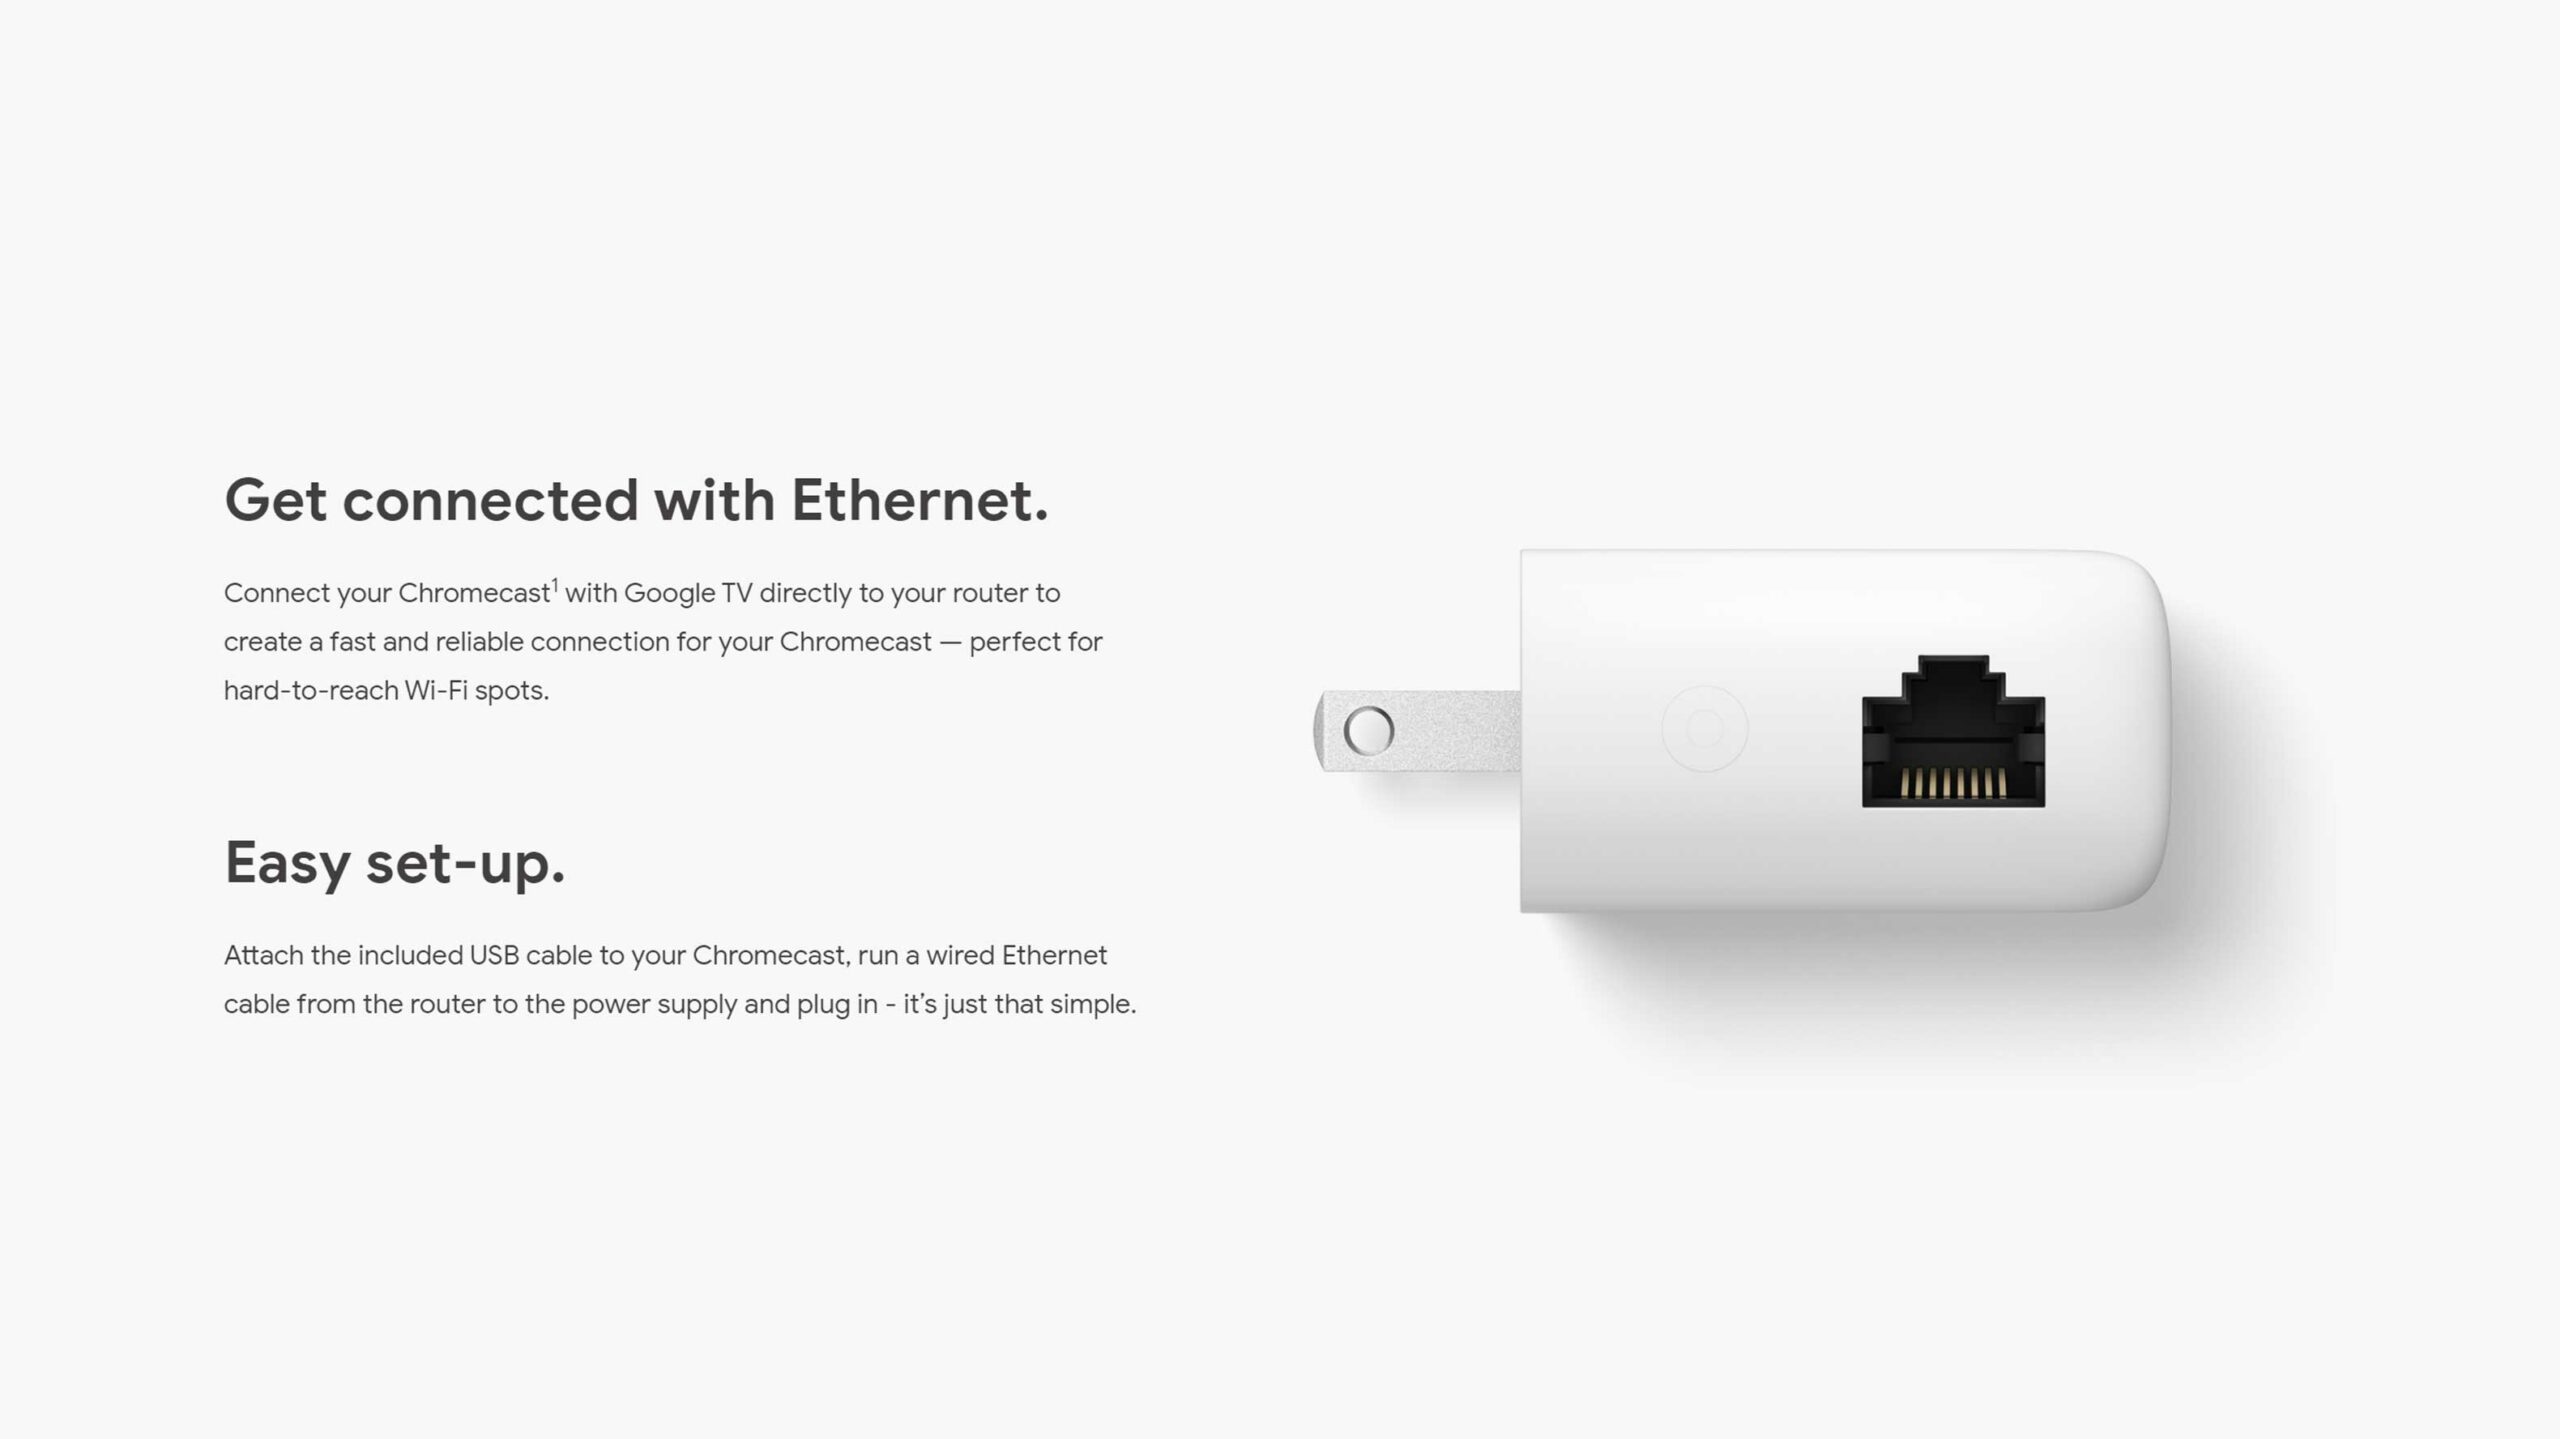 Google released Ethernet adapter for the